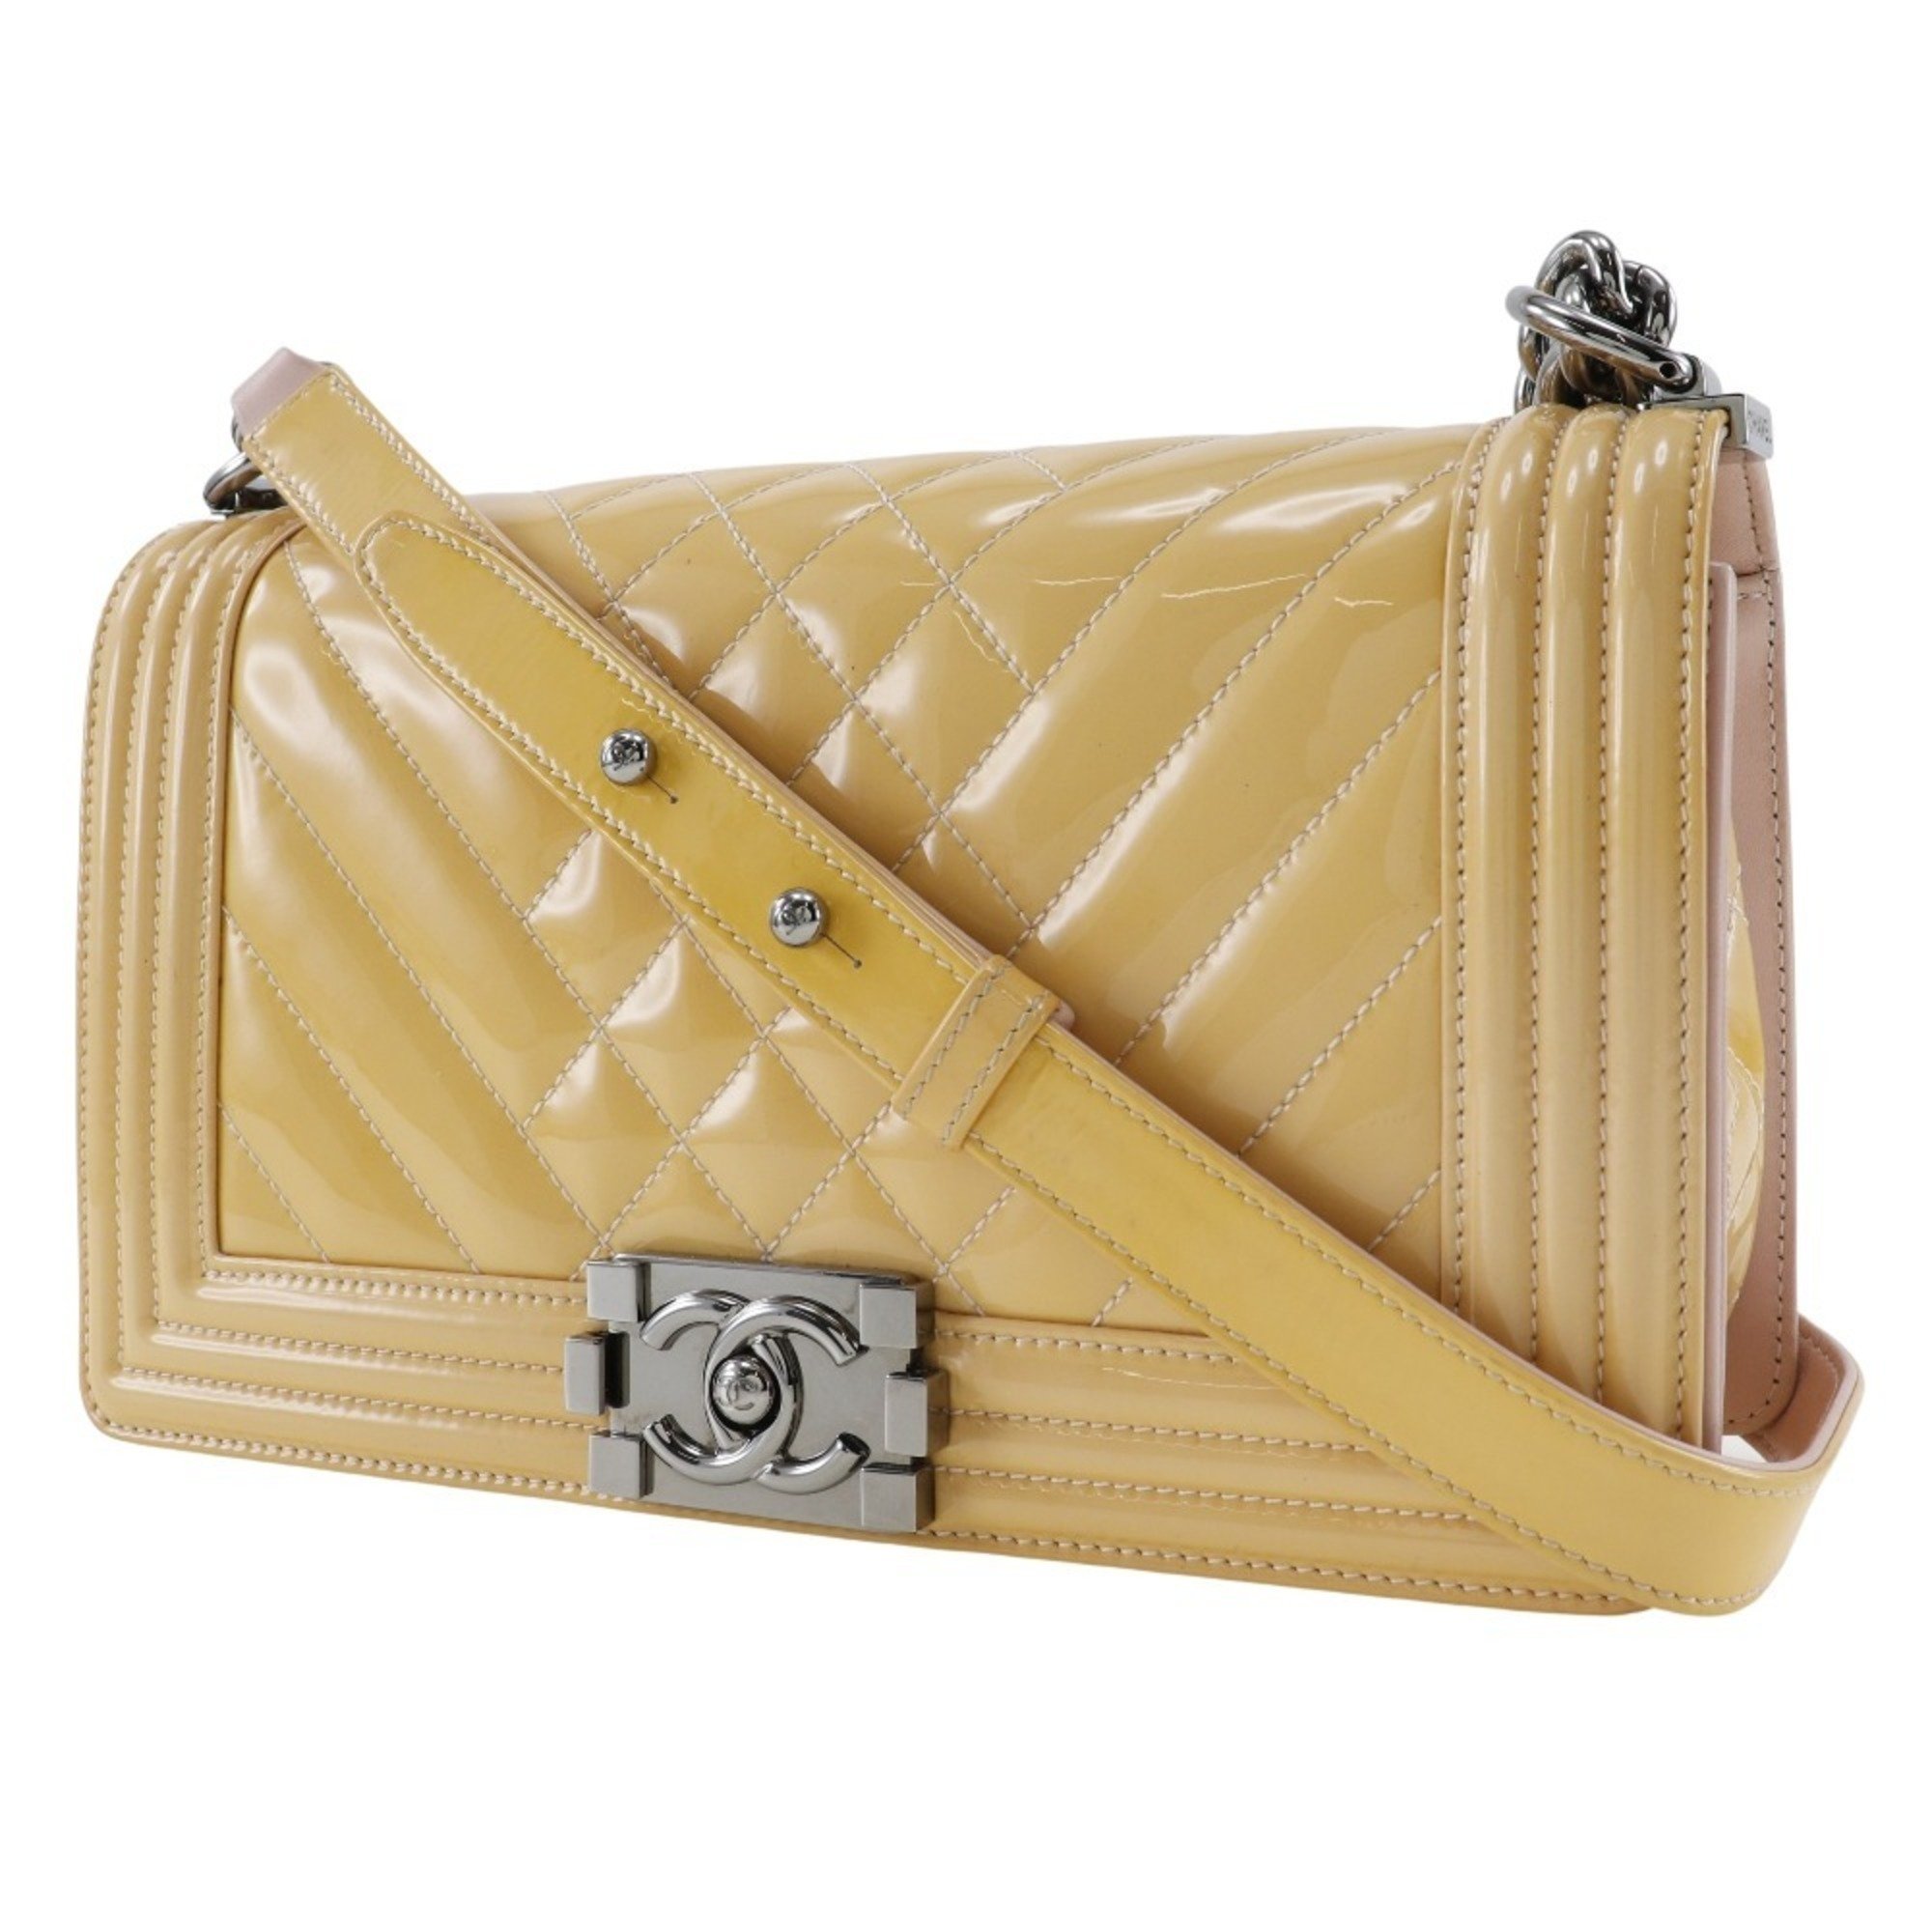 CHANEL Chain Shoulder Bag Boy Chanel Patent Leather Cream Yellow 2way Flap ChainShoulder Women's